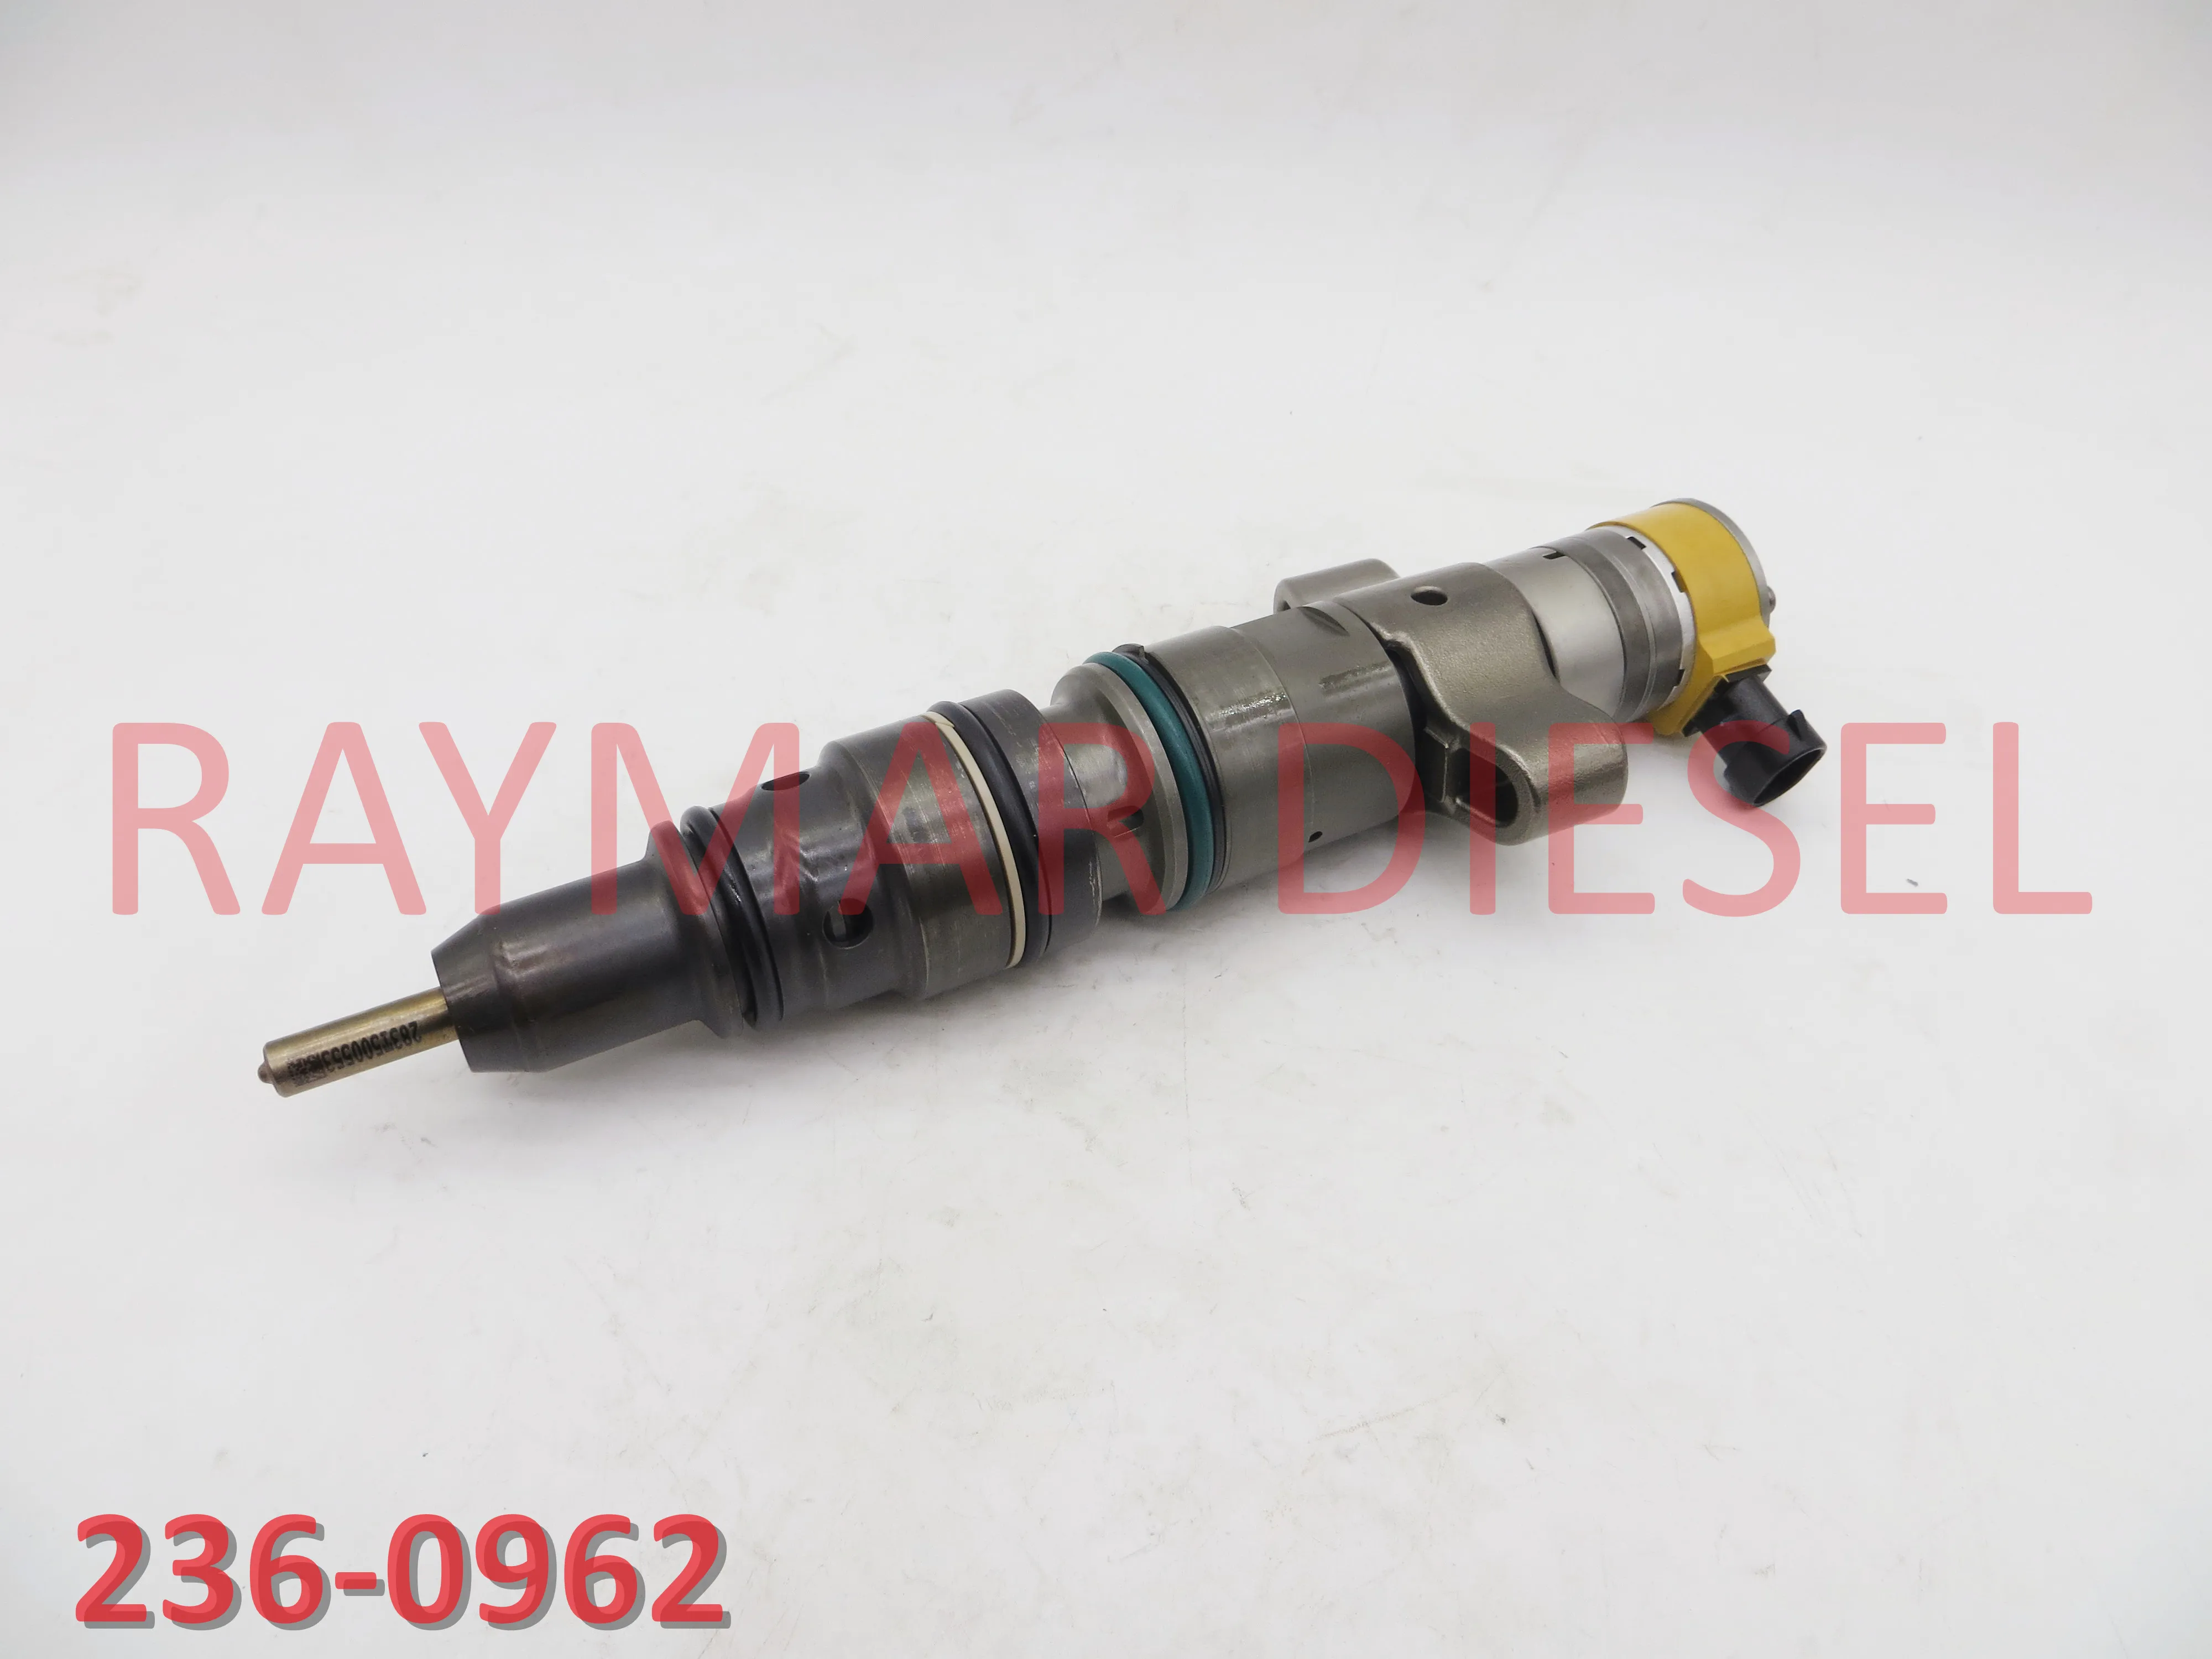 GENUINE NEW DIESEL COMMON RAIL FUEL INJECTOR 236-0962, 235-2888, 10R7224,  2360962 217-2570 FOR C7, C9 ENGINE